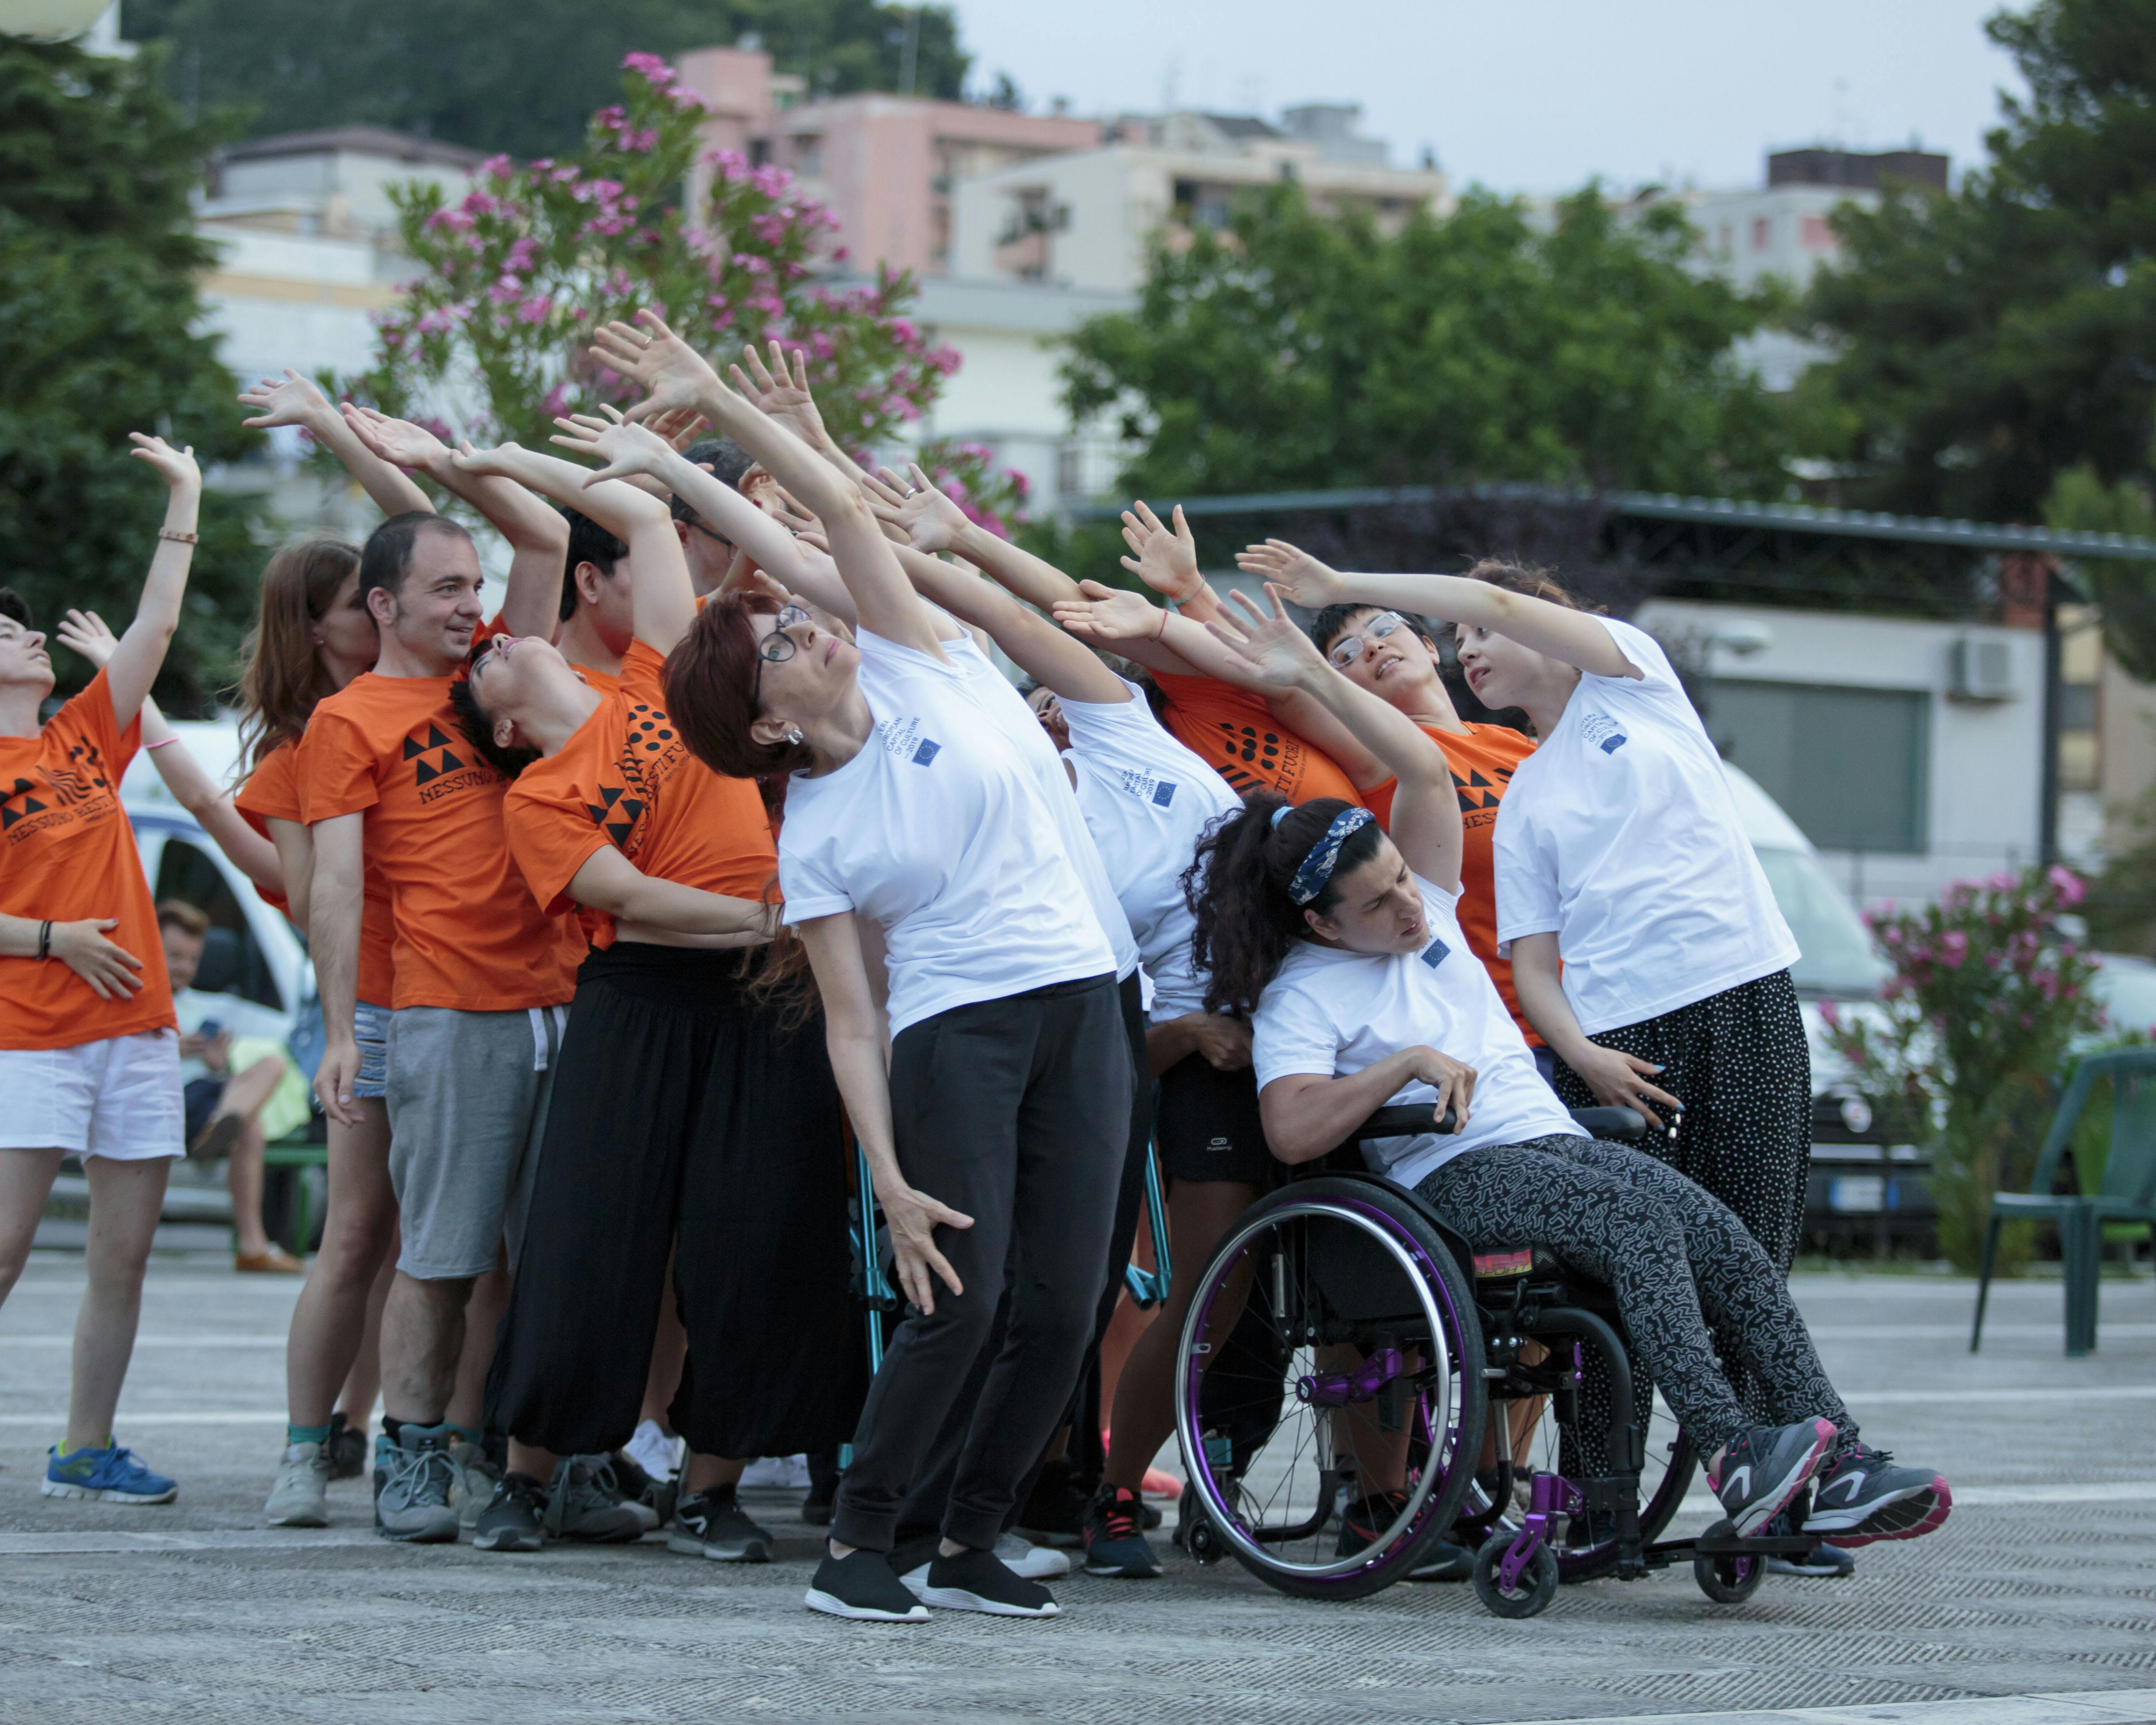 A group of performers with and without disabilities during a performance. They raise one arm upward while slightly tilting their torso back.